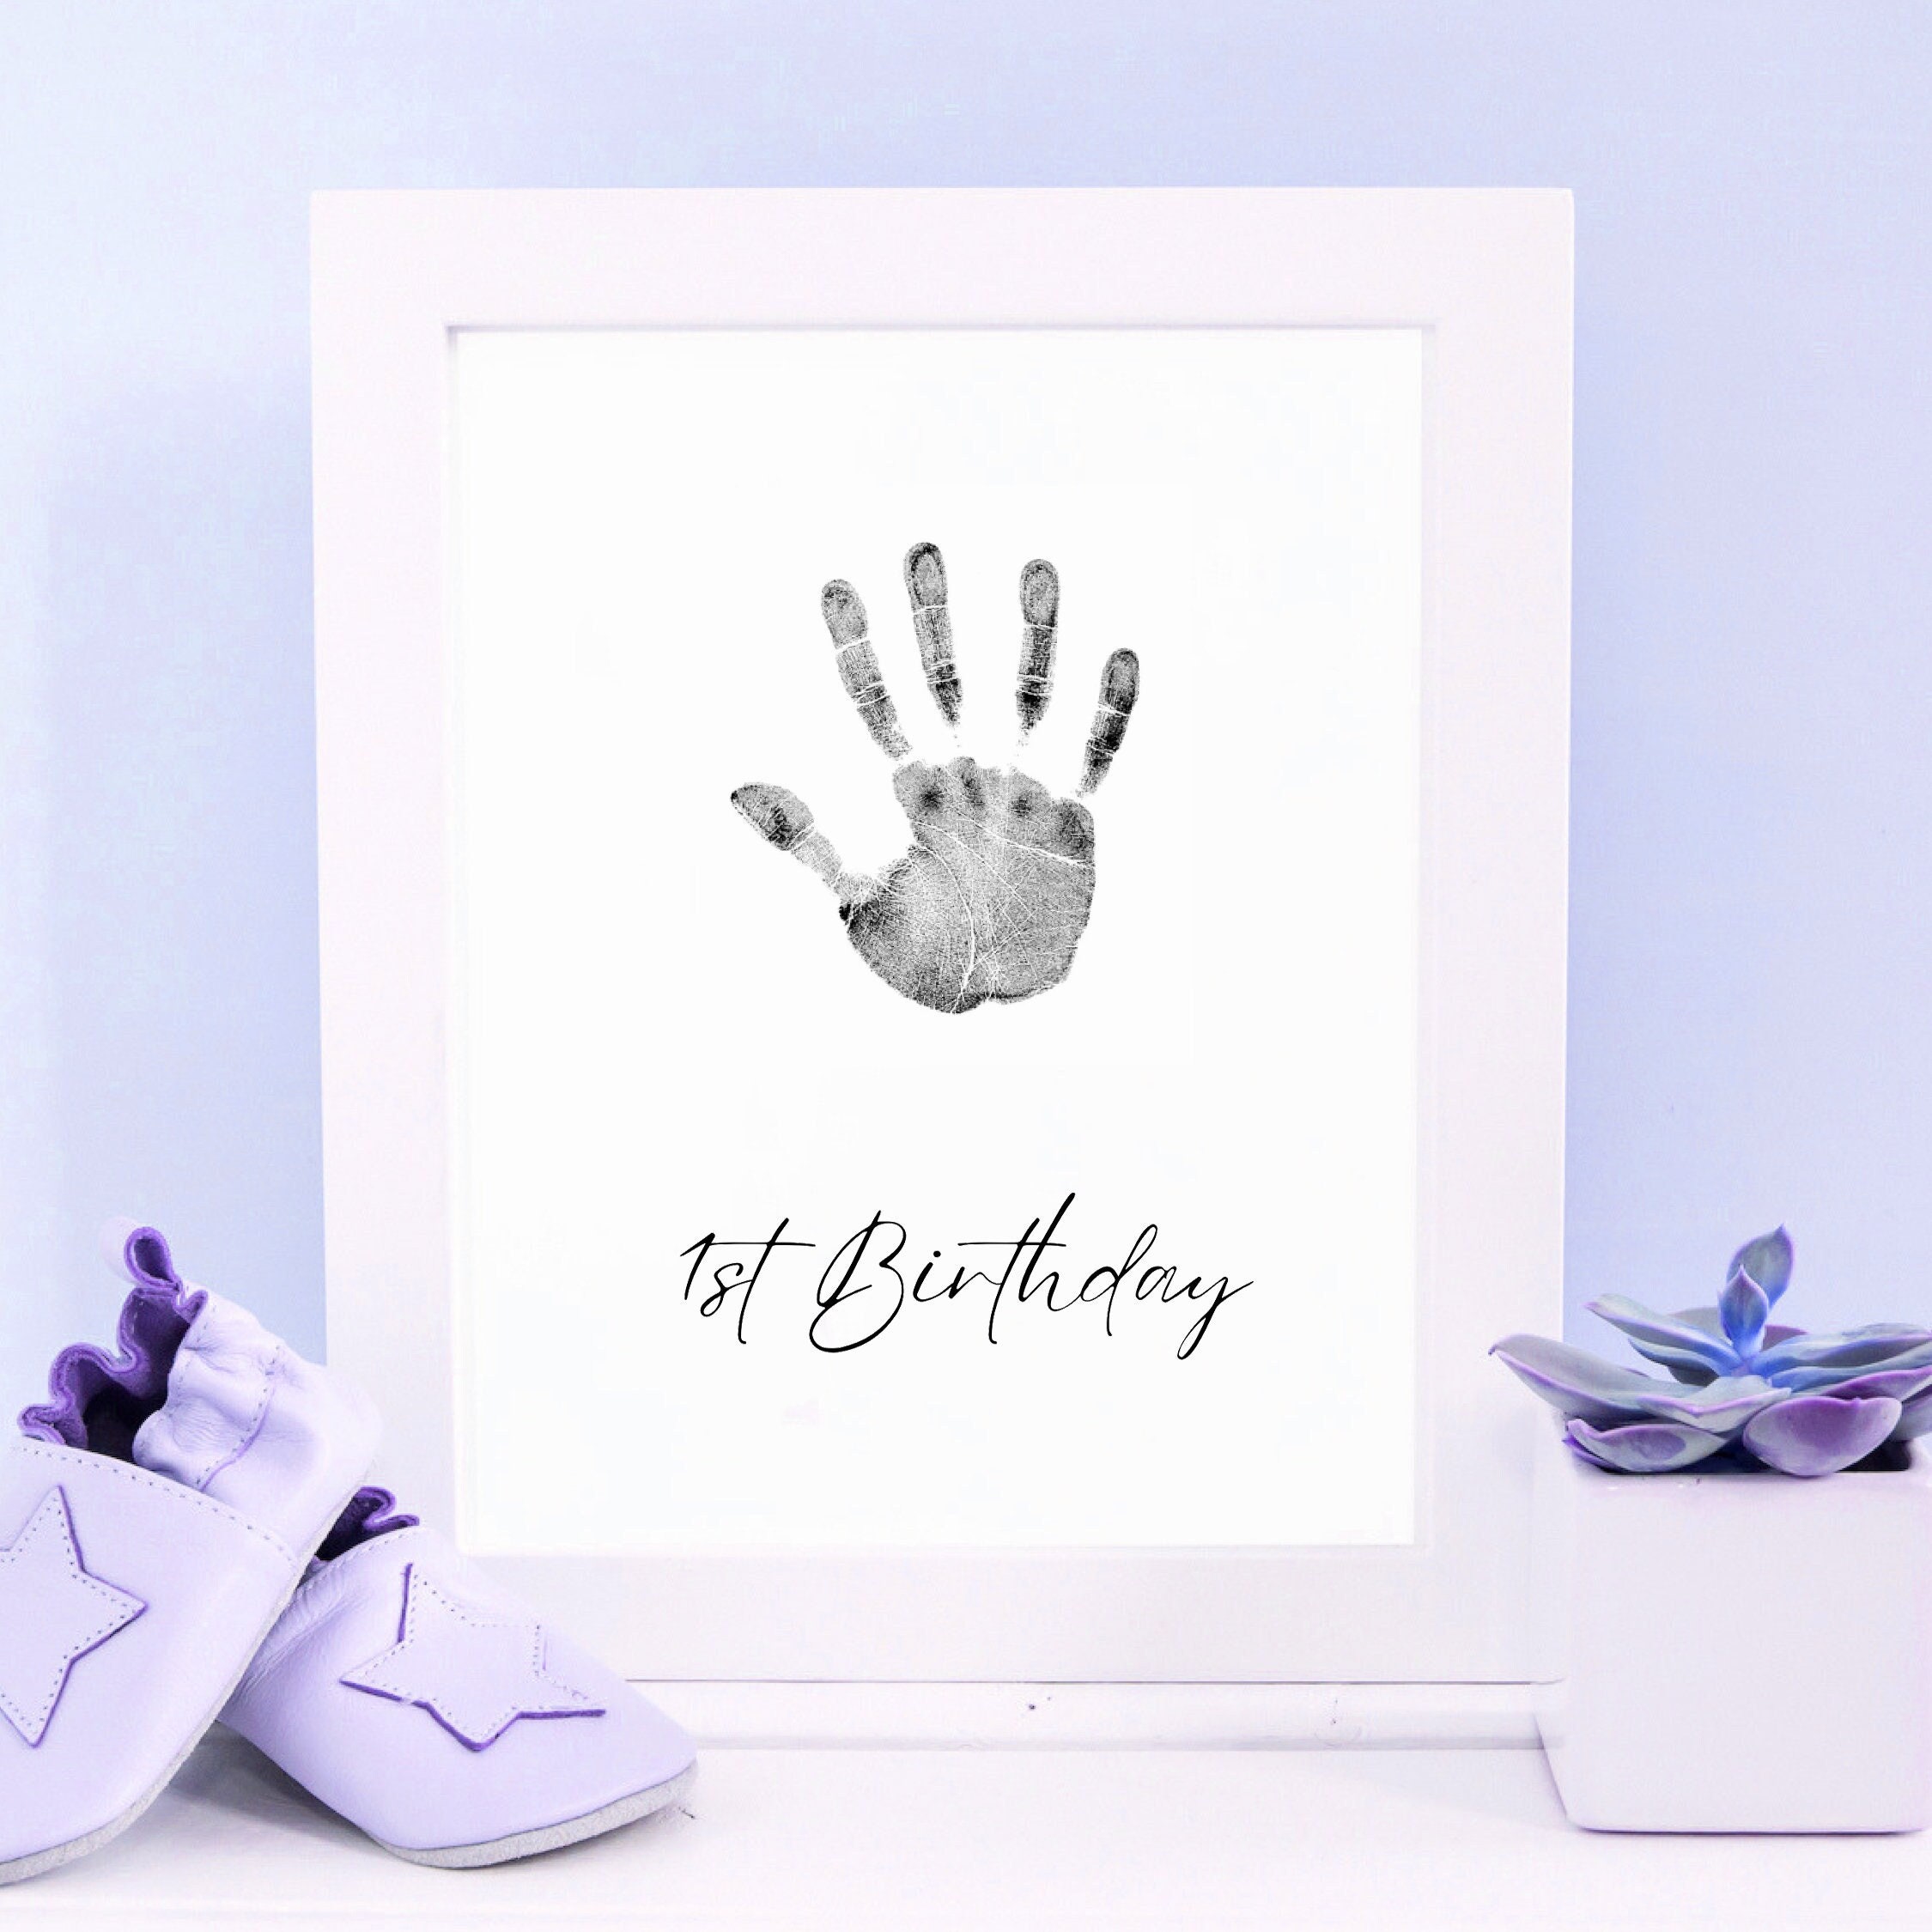 Baby Hand & Footprint Ceramic Keepsake Personalized With Name and Age baby  Handprint Kit Baby's First Handprint Art Toddler Handprint 